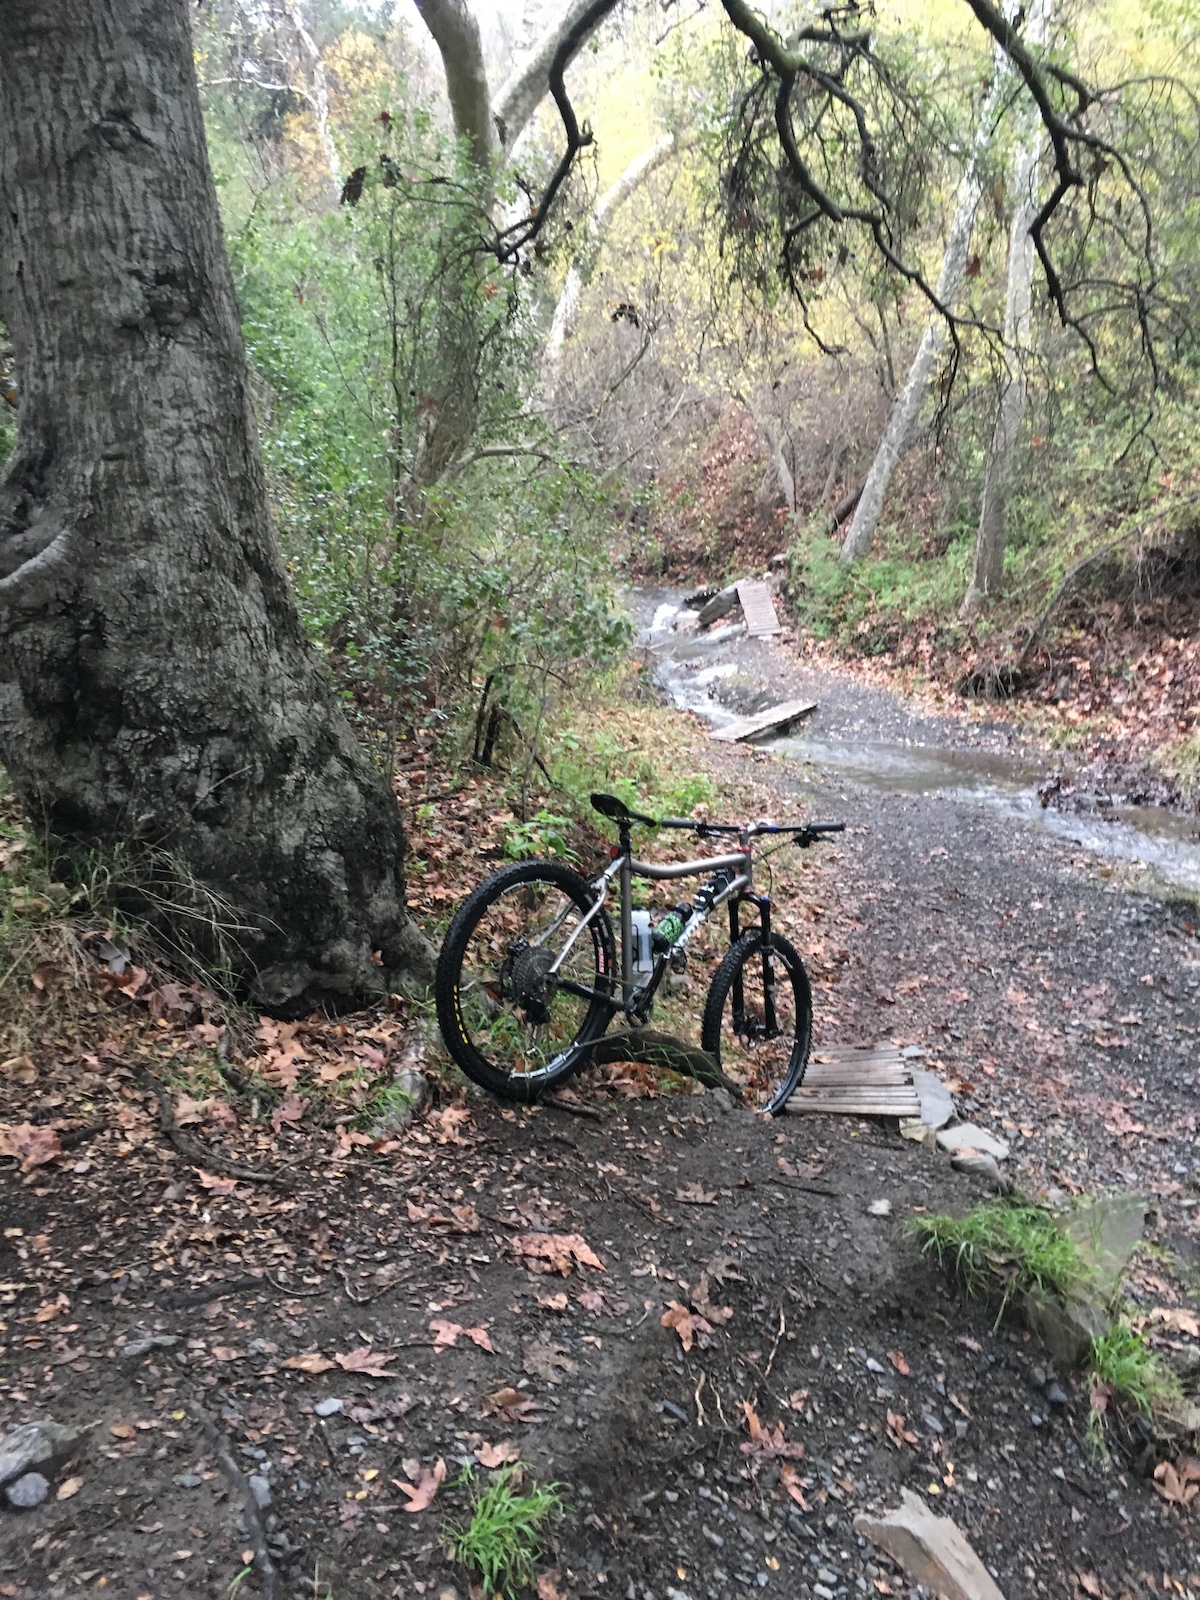 A ride through Nature's Playgorund in Southern California. This was taken in the Santa Monica Mountains in Sullivan Canyon mid winter. 
Bike in picture:
Moots Rogue Ybb 
Shimano XT Drivetrain 1x11 
Shimano XT Brakes
Moots TI Stem
Enve Sweep bars
Chris King Headset
Stans Arch Mk3 Wheelset
Rock Shox Reba Fork 120mm
Tires: 
Frt: Schwalbe Nobby Nic 2.35
R: Maxxis Ardent Race 2.2
KS Lev Dropper
Fabric Shallow Race Saddle
One Up Cassette Expander 50 Tooth
XT Trail Pedals